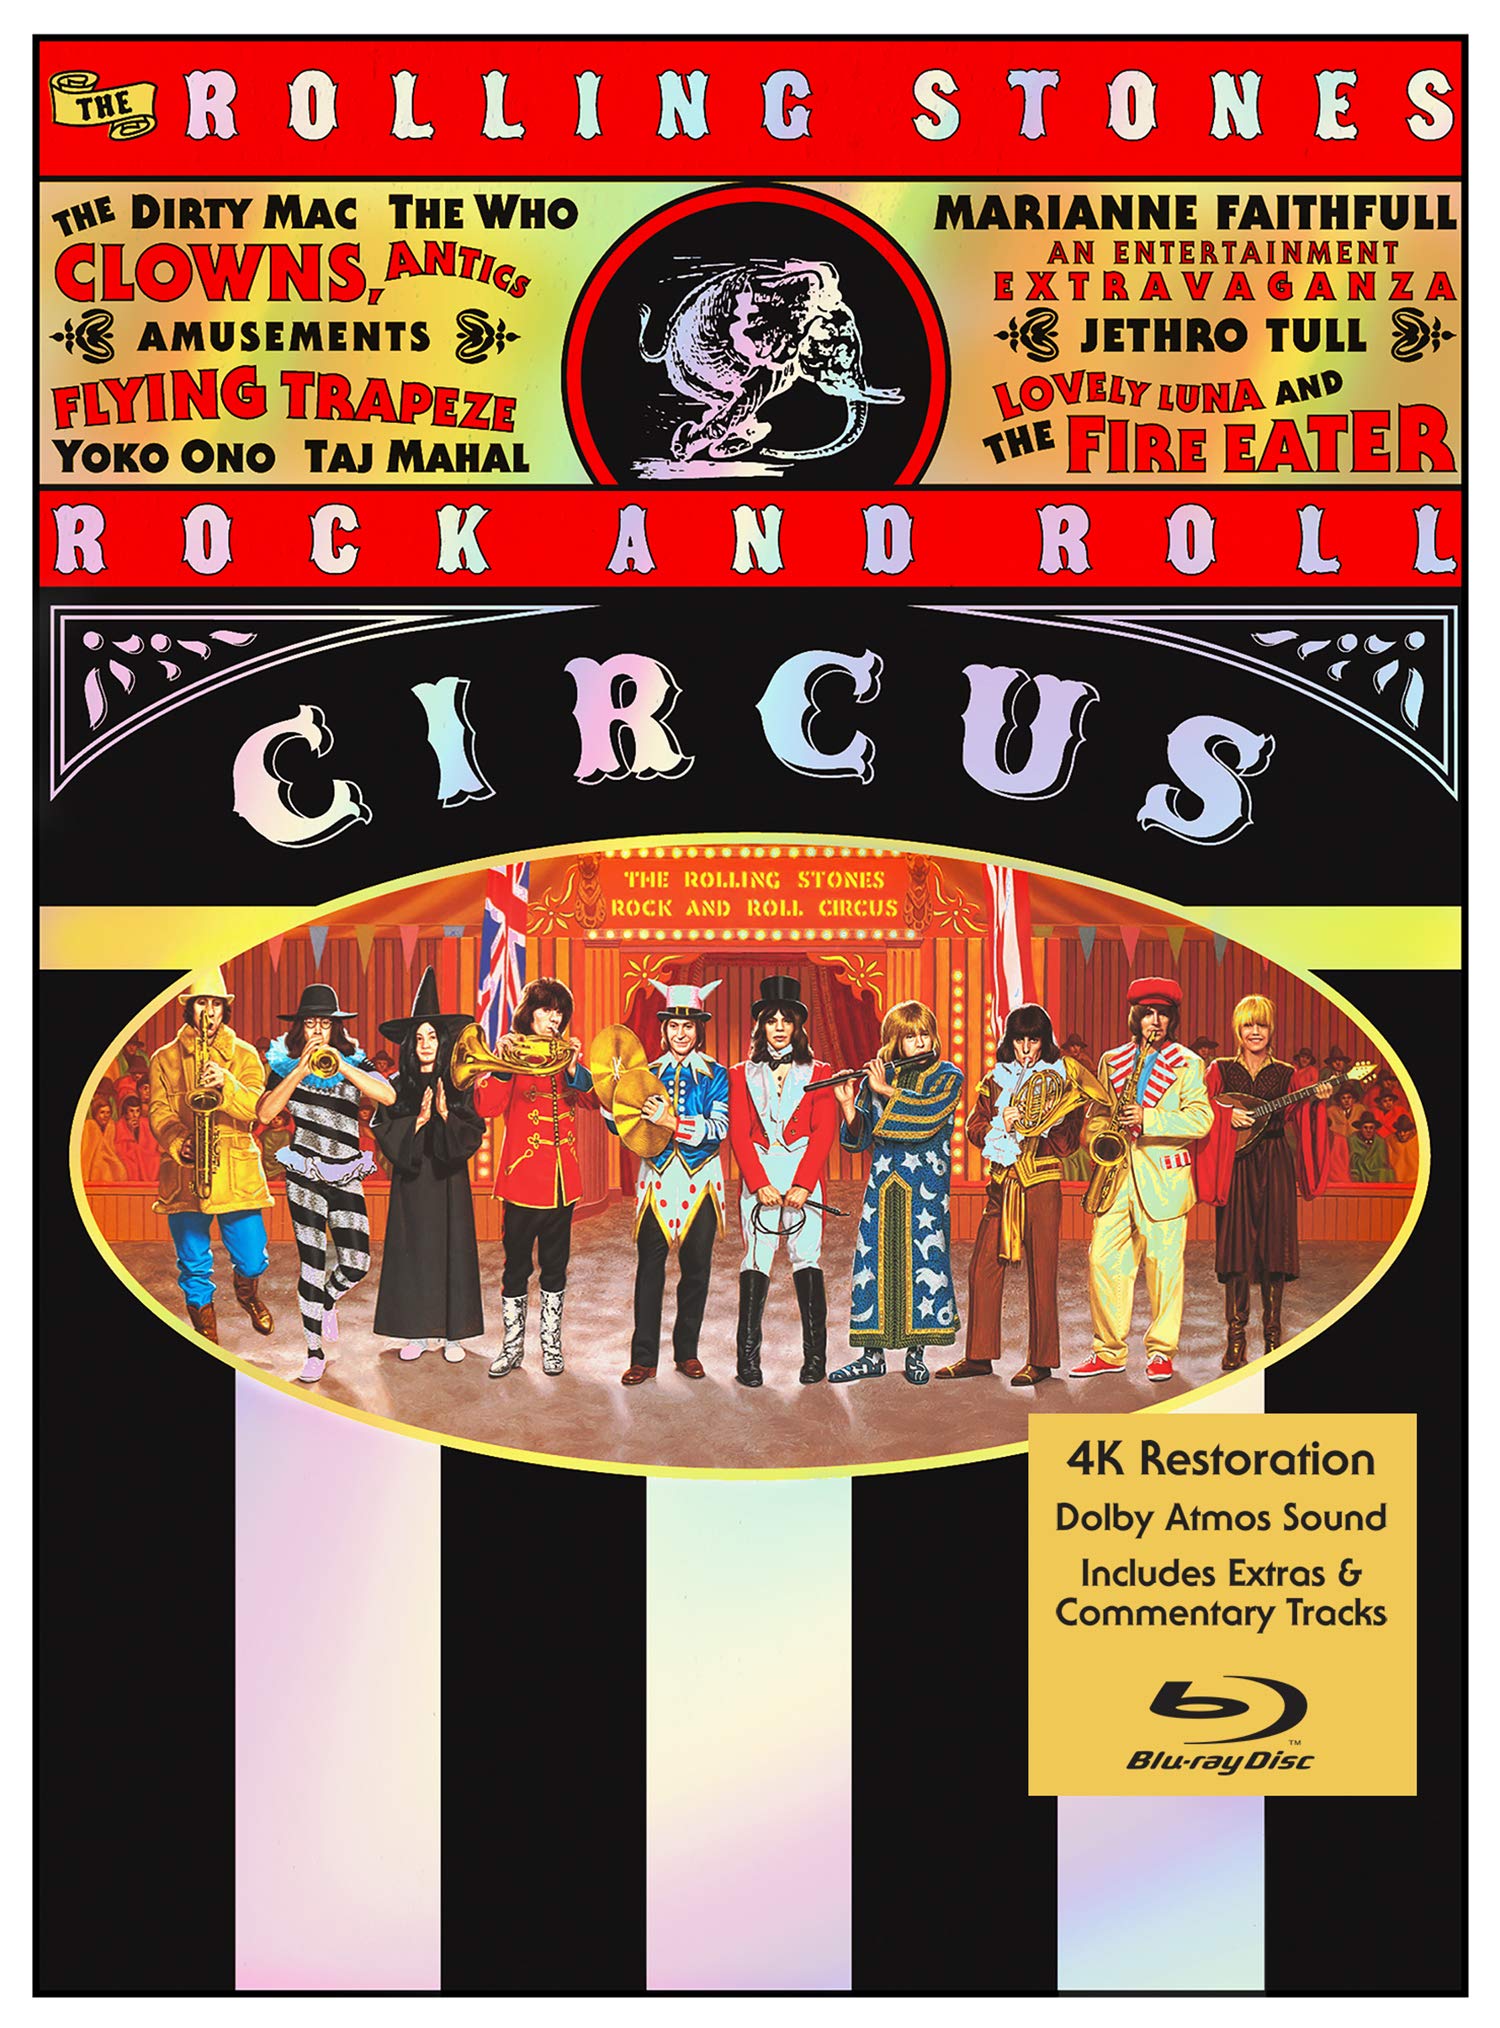 Various Artists - The Rolling Stones Rock And Roll Circus 1968 (1996/2019) SD Blu-ray 1080p AVC Atmos TrueHD 7.1 + BDRip 1080p